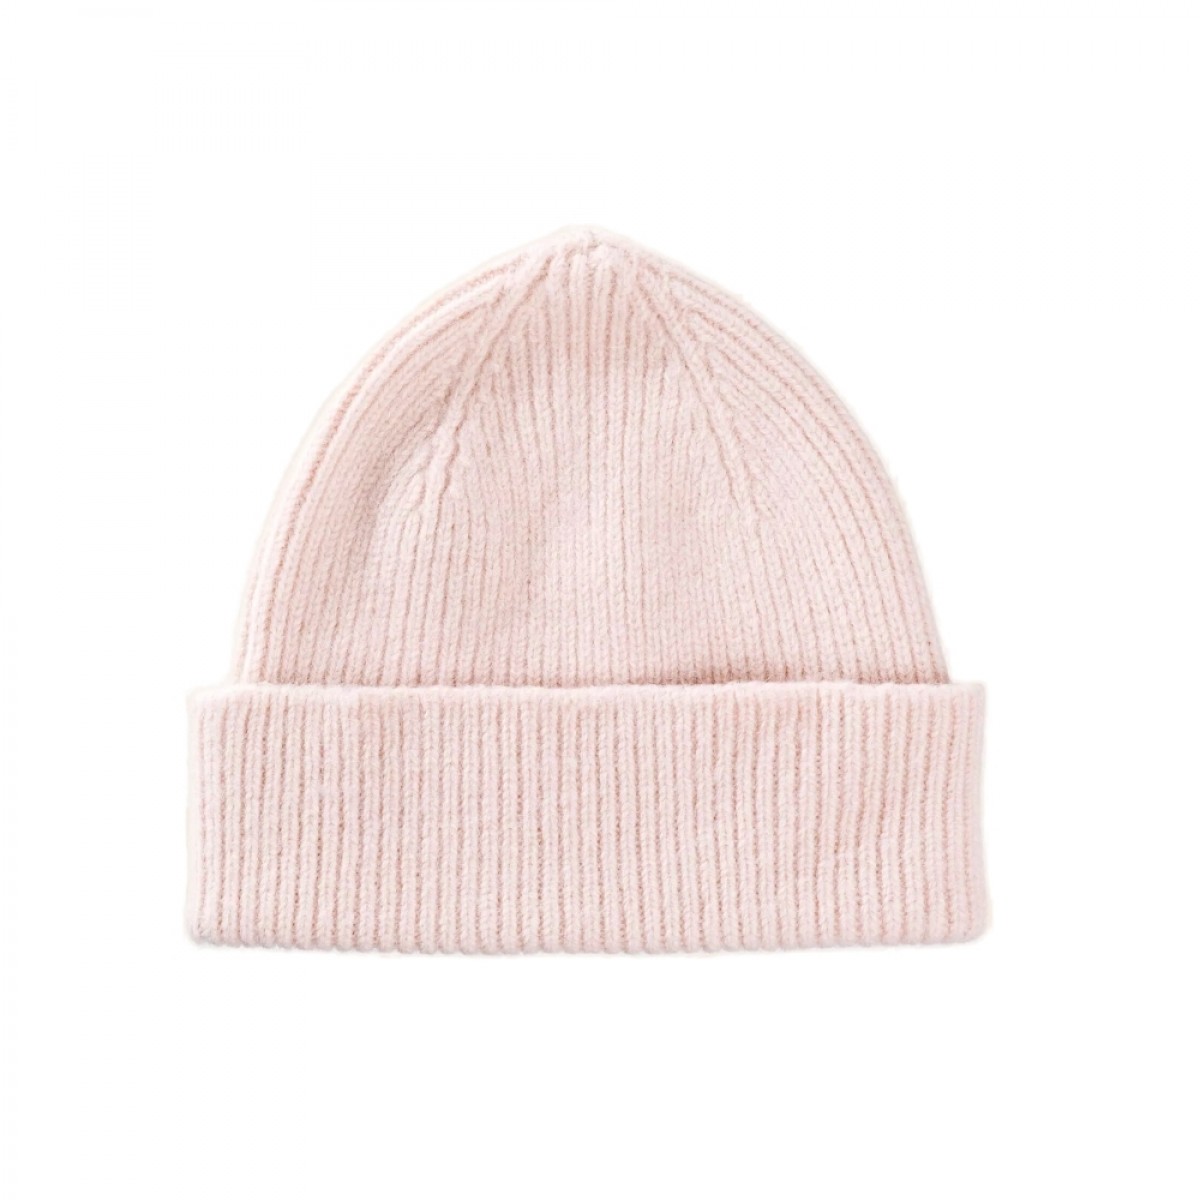 beanie - misty rose - front